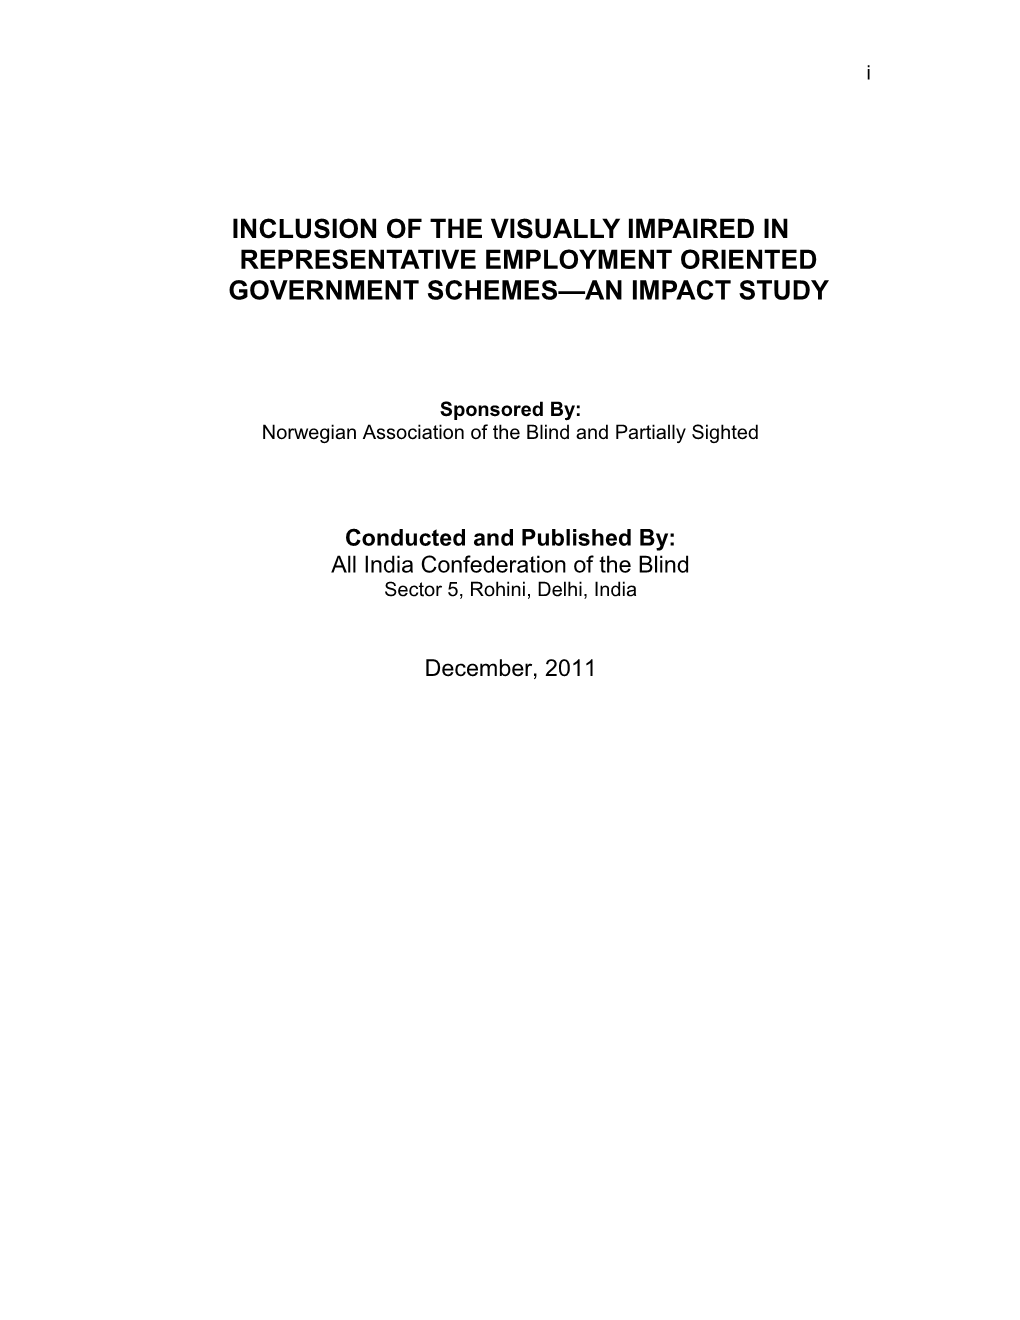 Inclusion of the Visually Impaired in Representative Employment Oriented Government Schemes